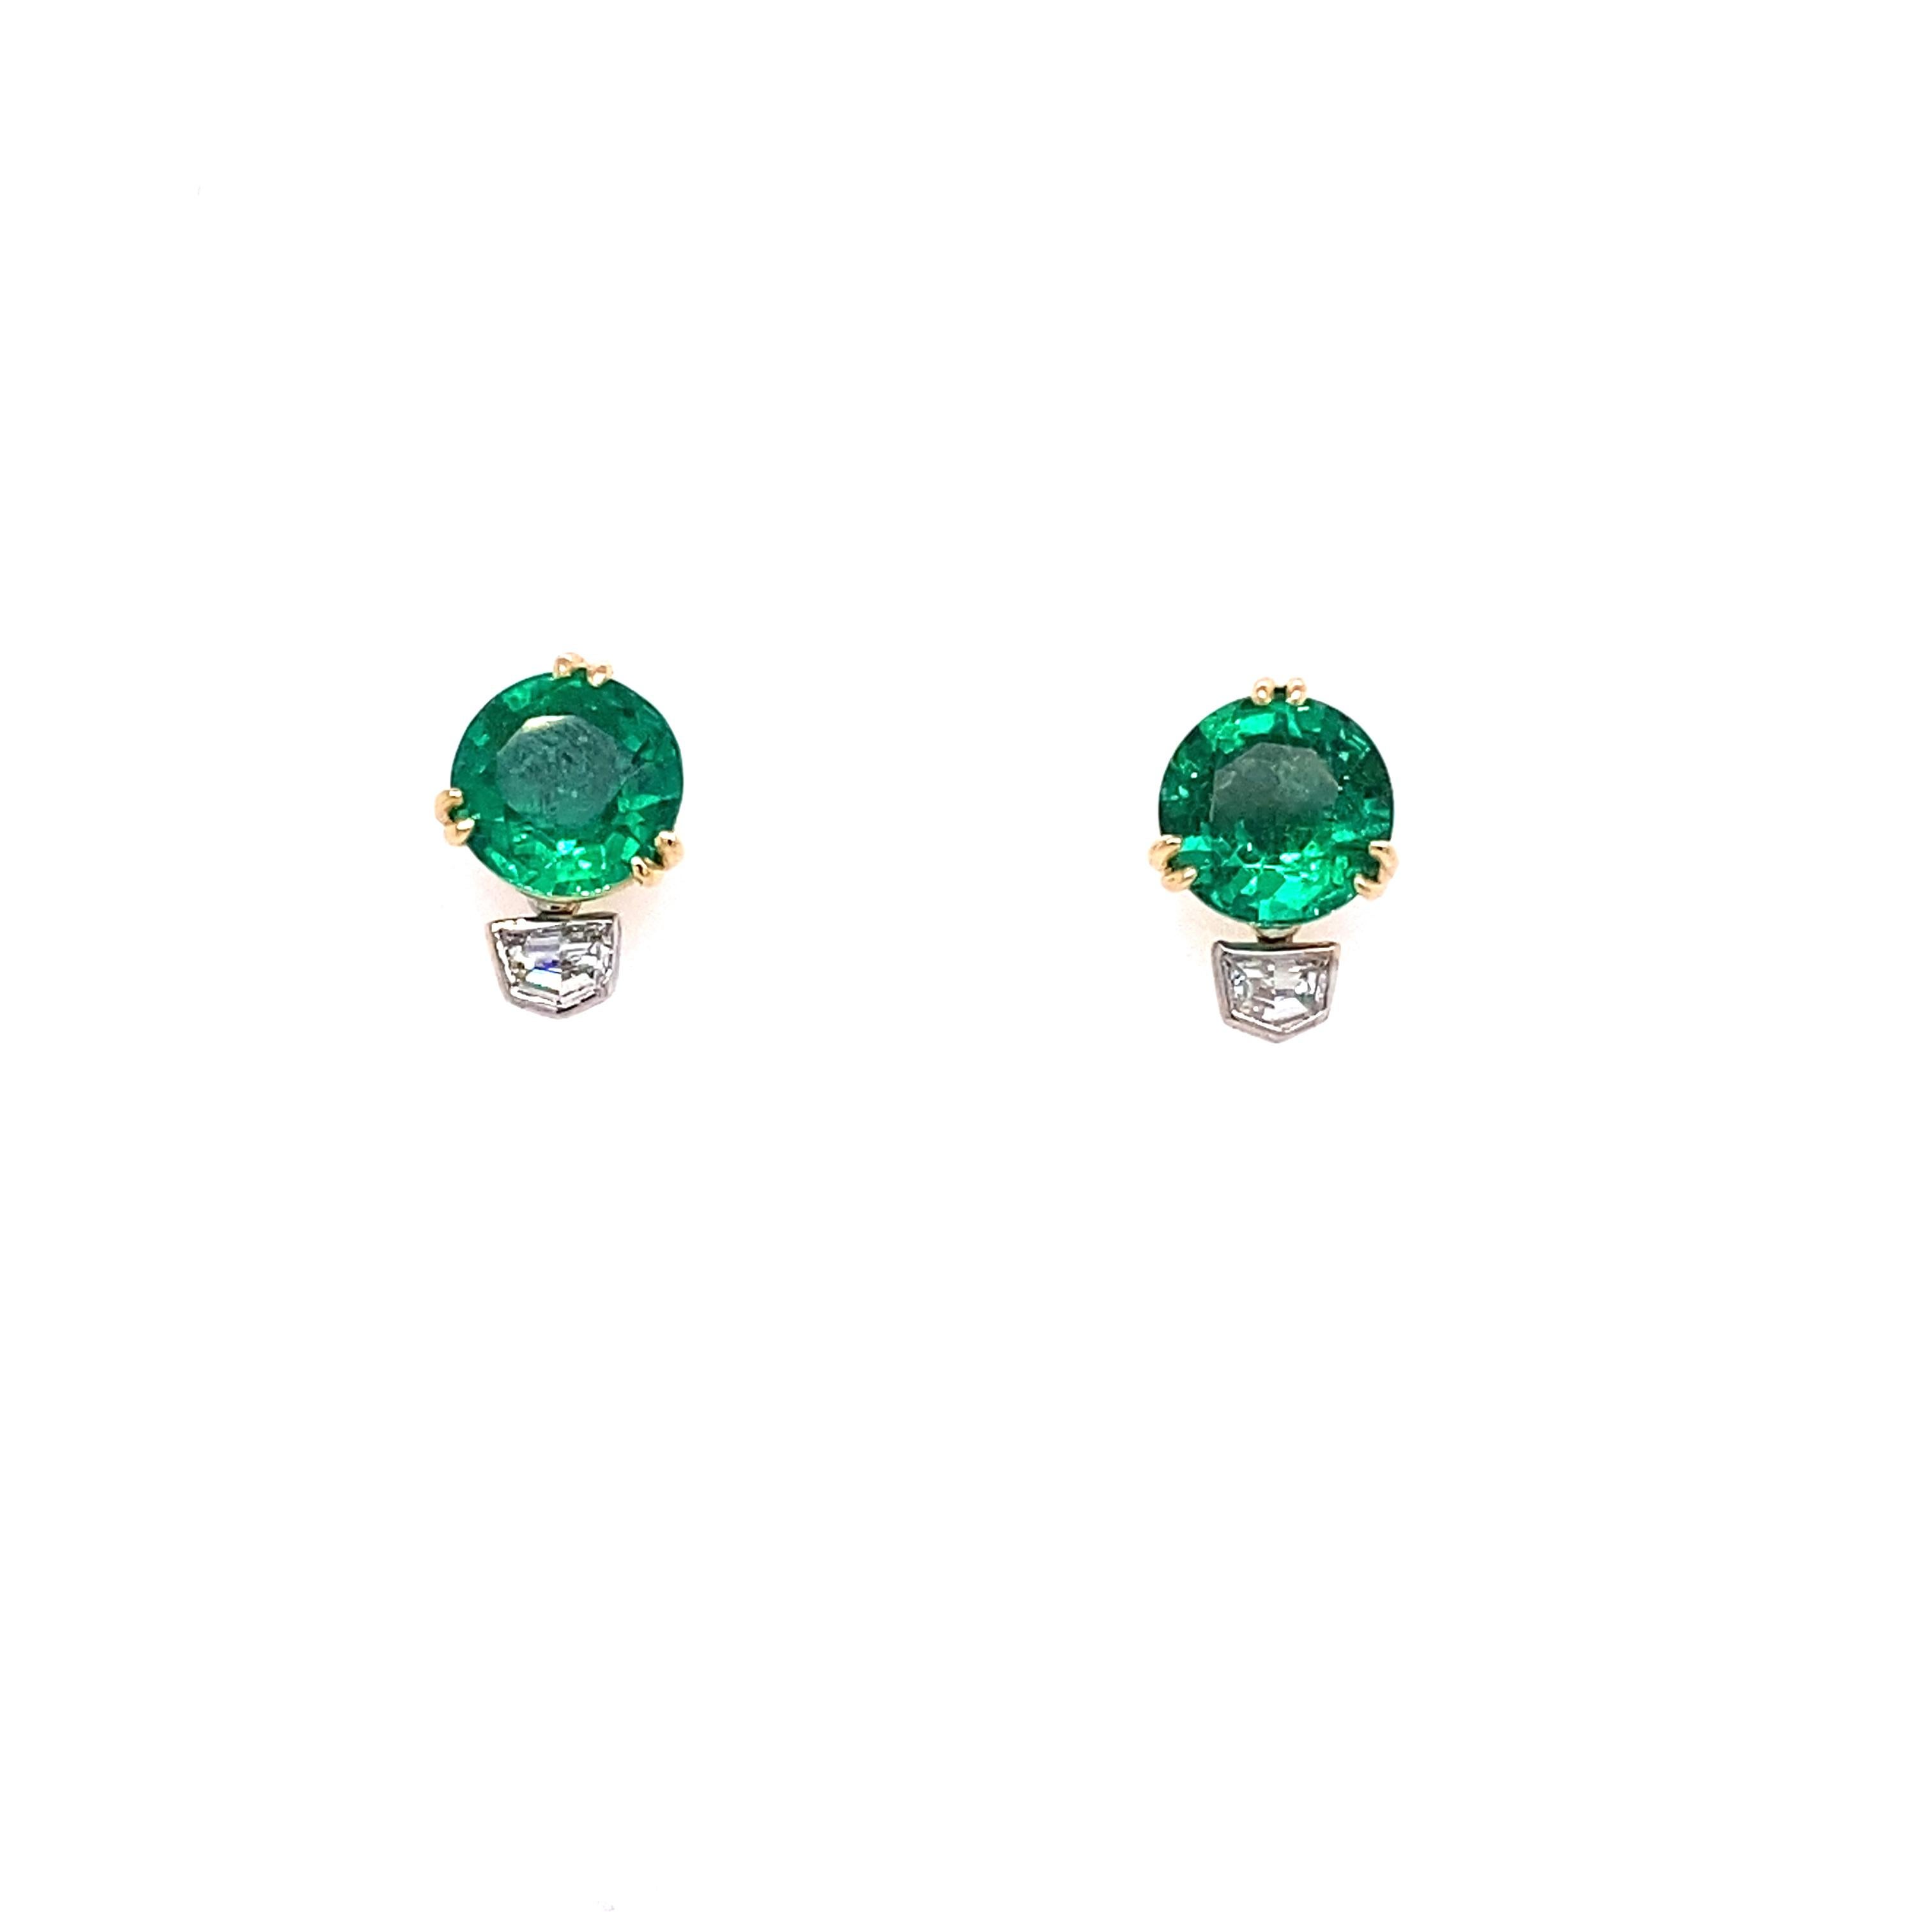 These stud earrings feature Zambian emeralds totaling 4.08 carats with a cadillac cut diamond that drops below and round diamonds along the gallery rail with a total weight of .47 carats.  Set in 18 karat yellow and white gold. Post Back.  
Weight: